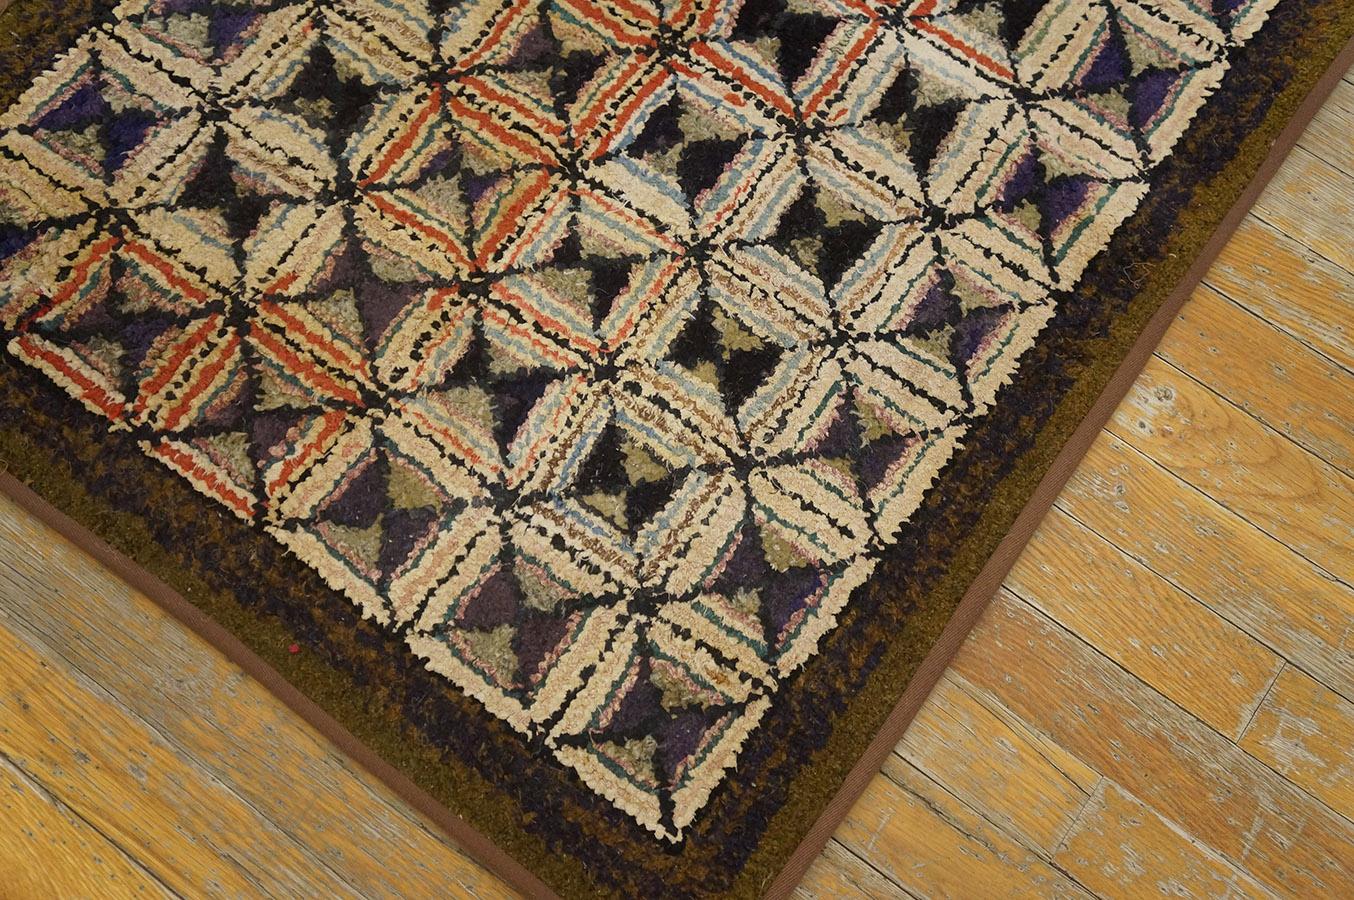 Antique Amercian Hooked Rug 2' 4''x 3' 4''  In Good Condition For Sale In New York, NY